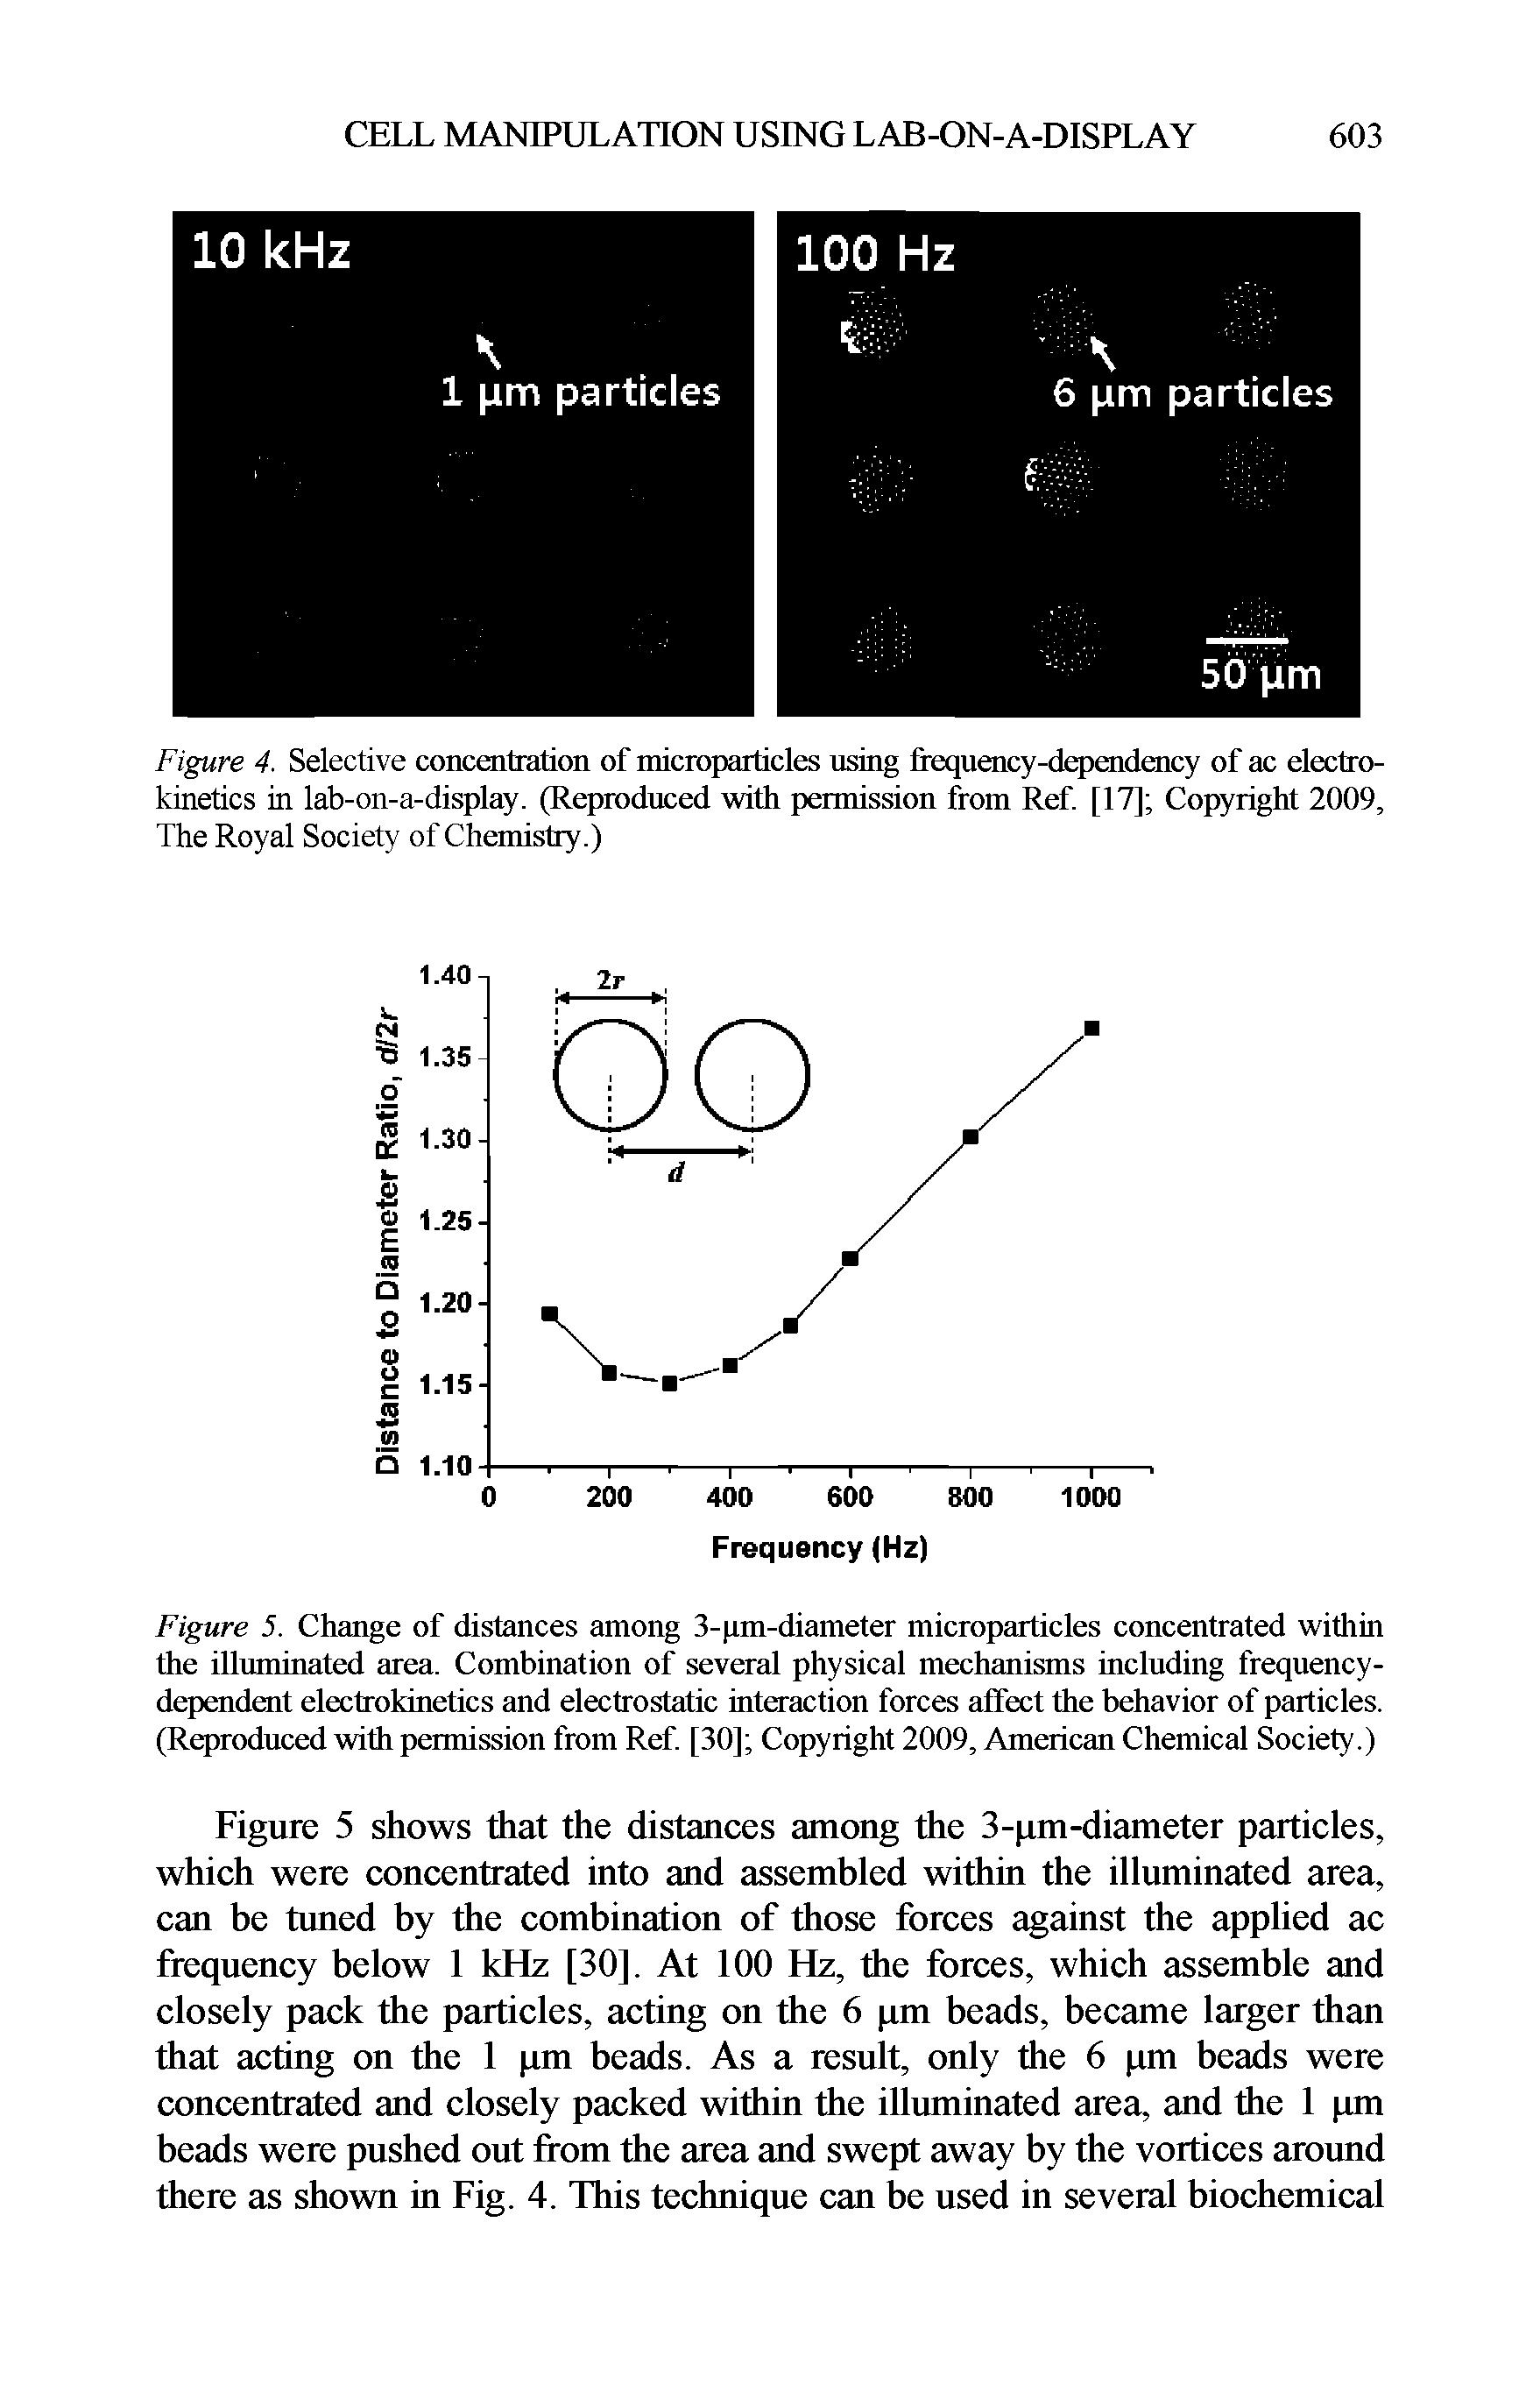 Figure 5. Change of distances among 3-pm-diameter microparticles concentrated within the illuminated area. Combination of several physical mechanisms including frequency-dependent electrokinetics and electrostatic interaction forces affect the behavior of particles. (Reproduced with permission from Ref [30] Copyright 2009, American Chemical Society.)...